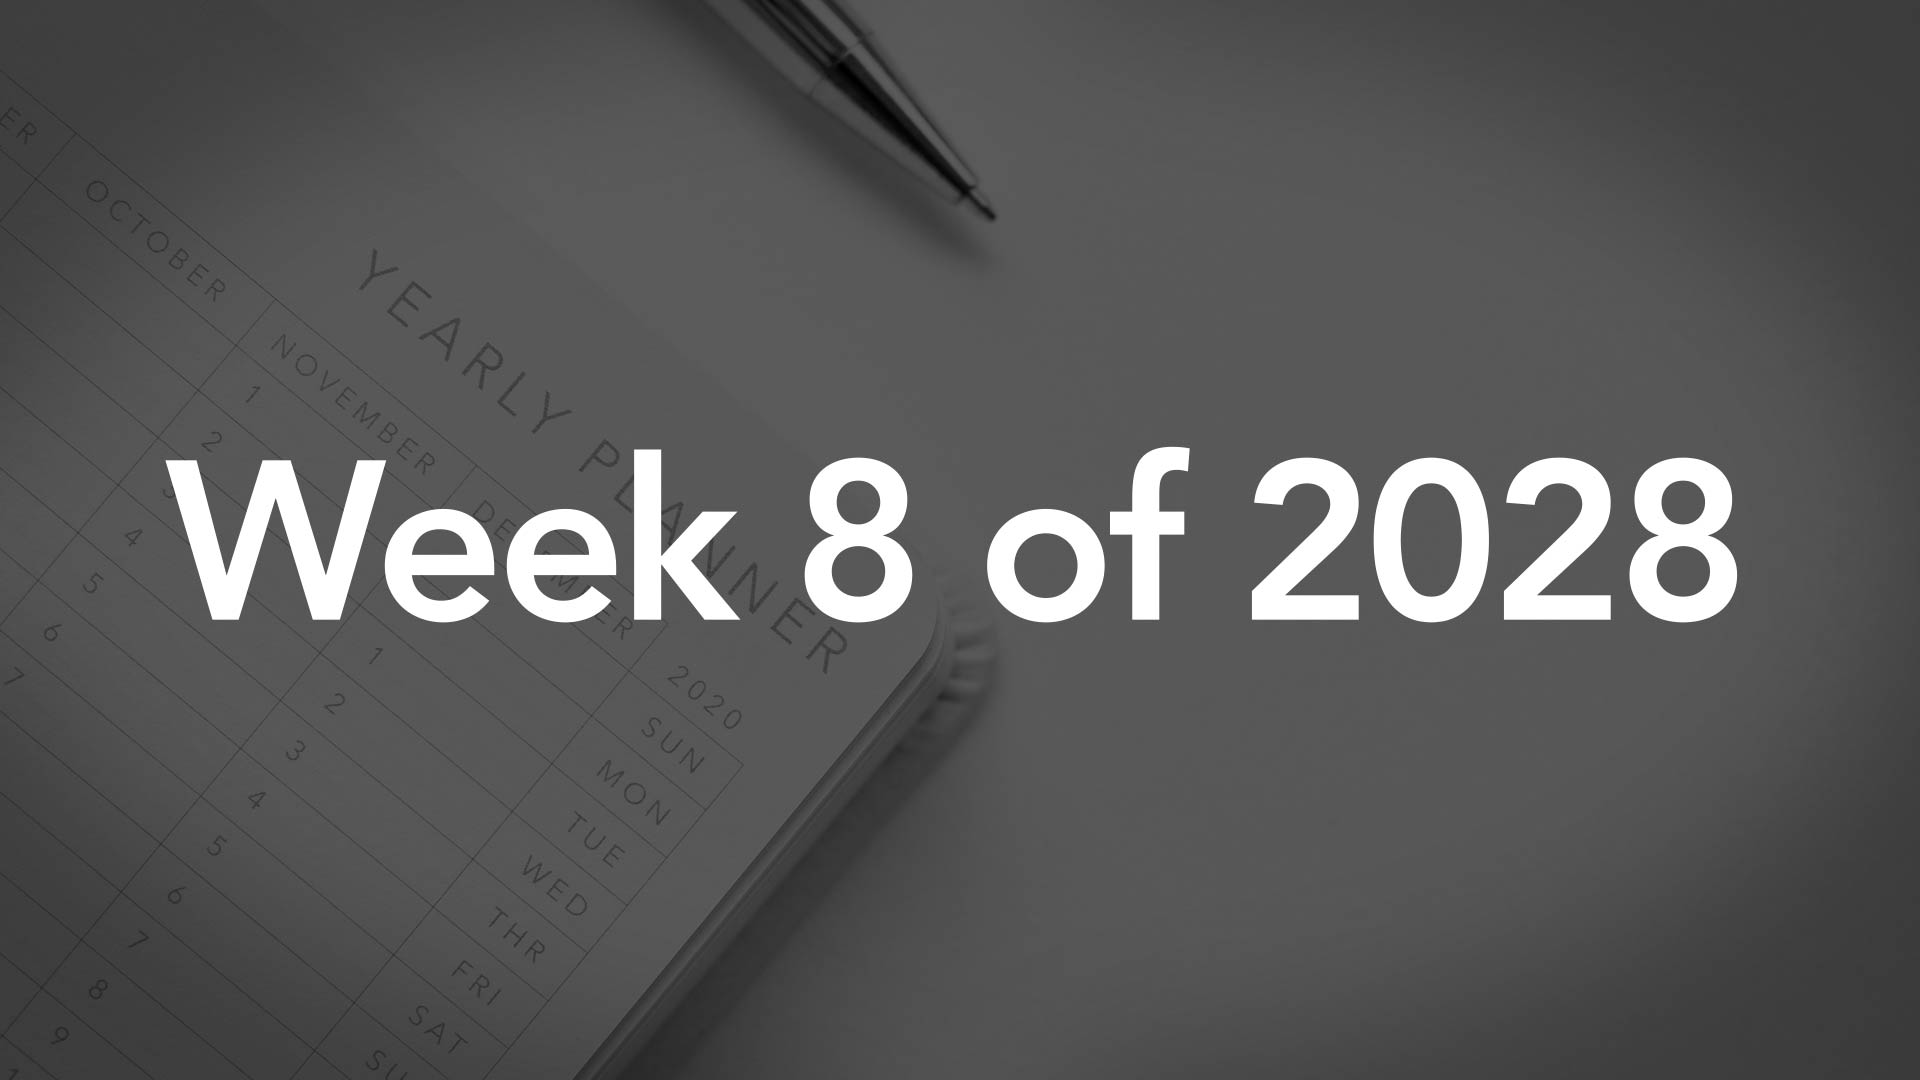 Title Image for Week 8 of 2028